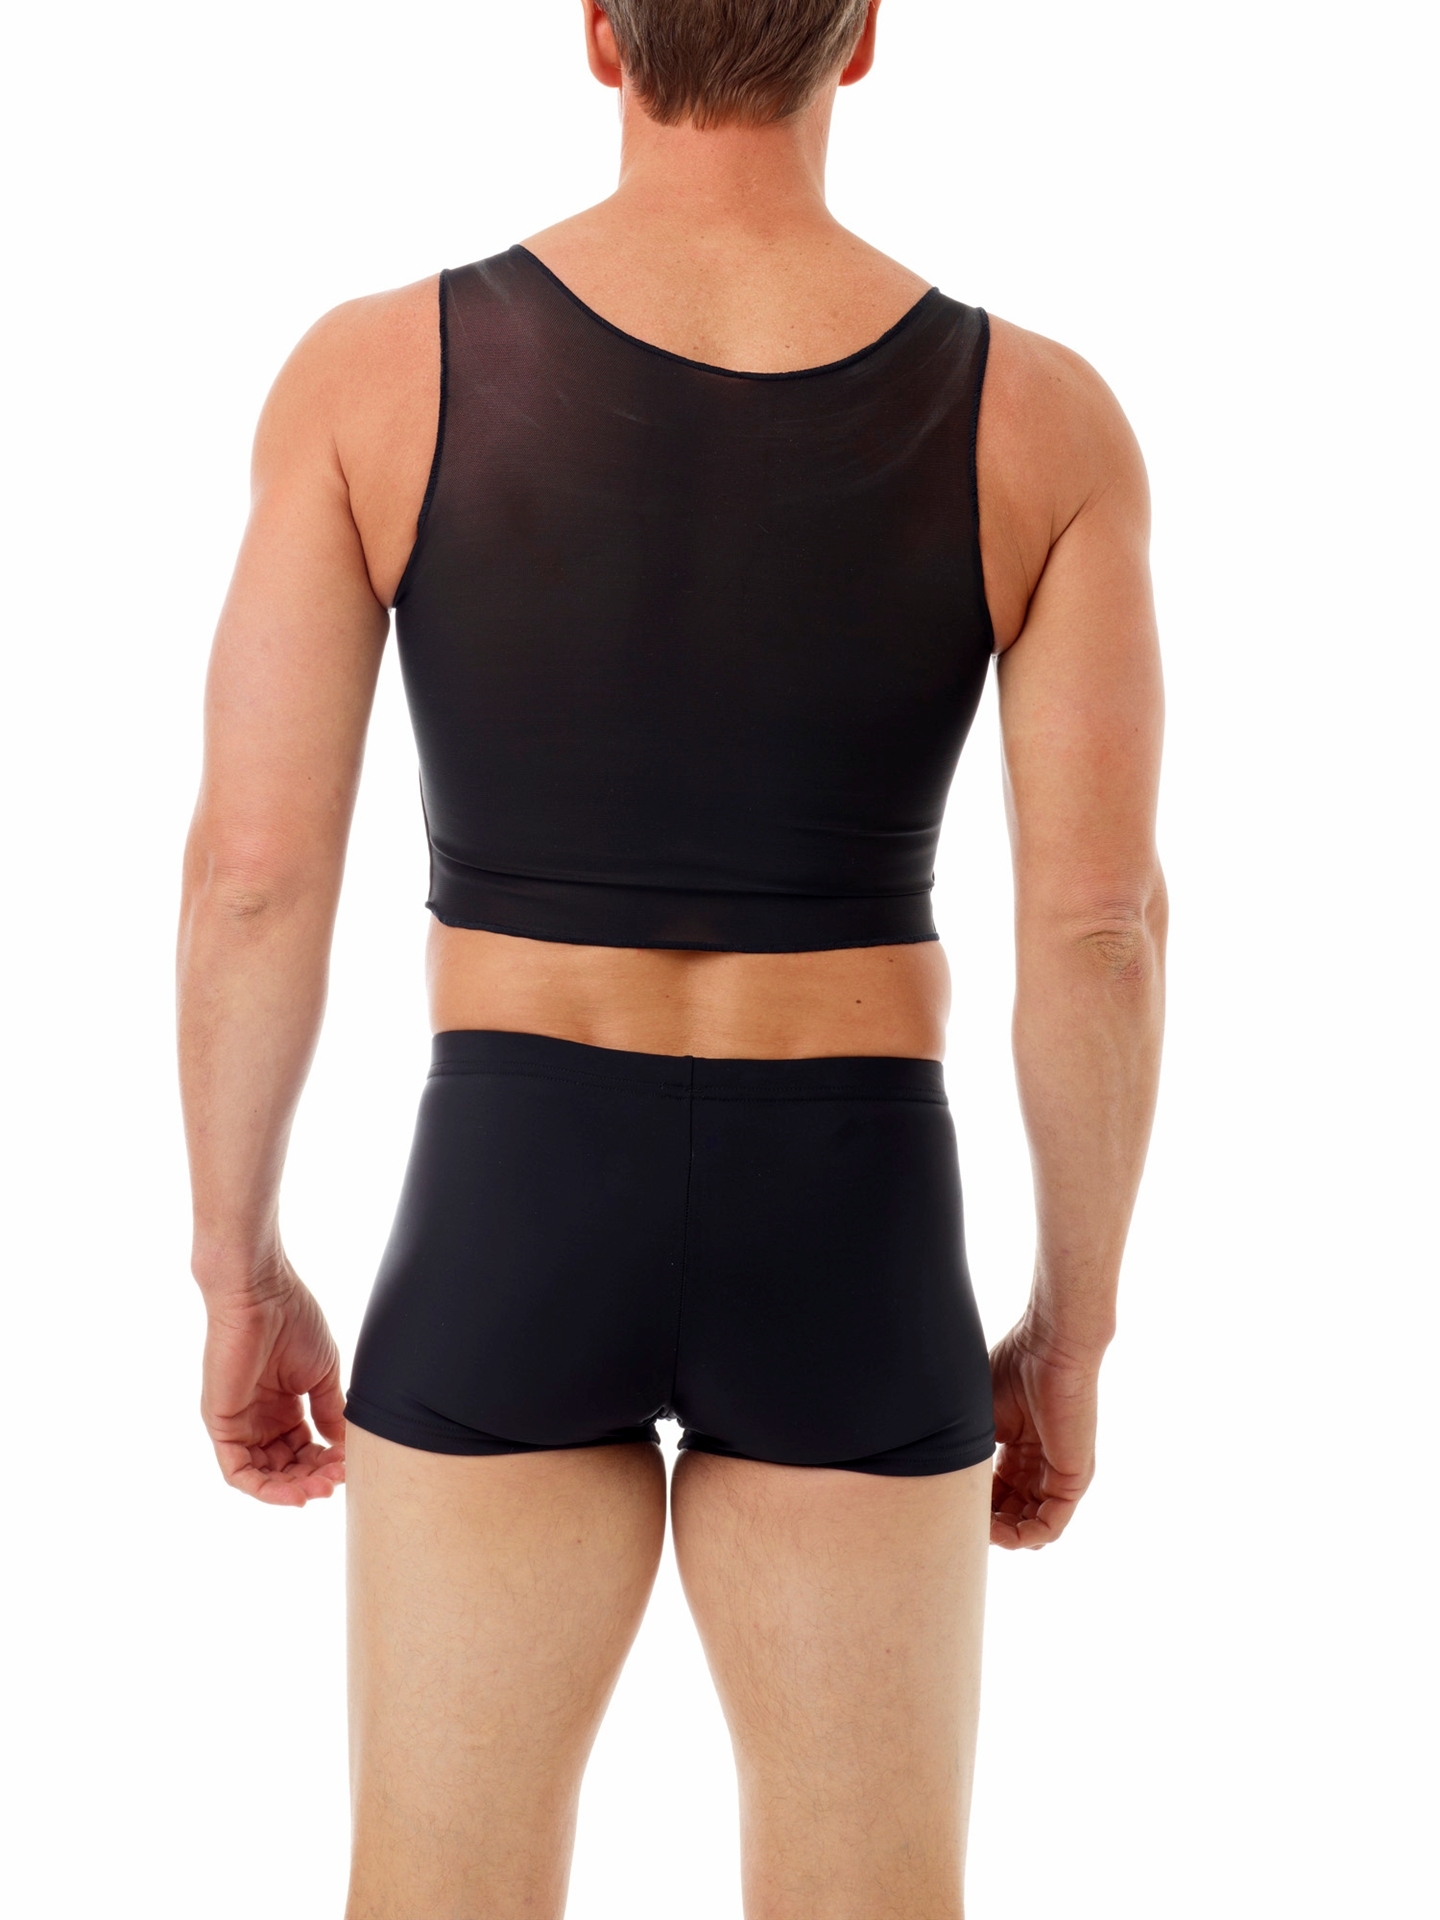 Tri-top Chest Binder - provide maximum comfortable and extreme